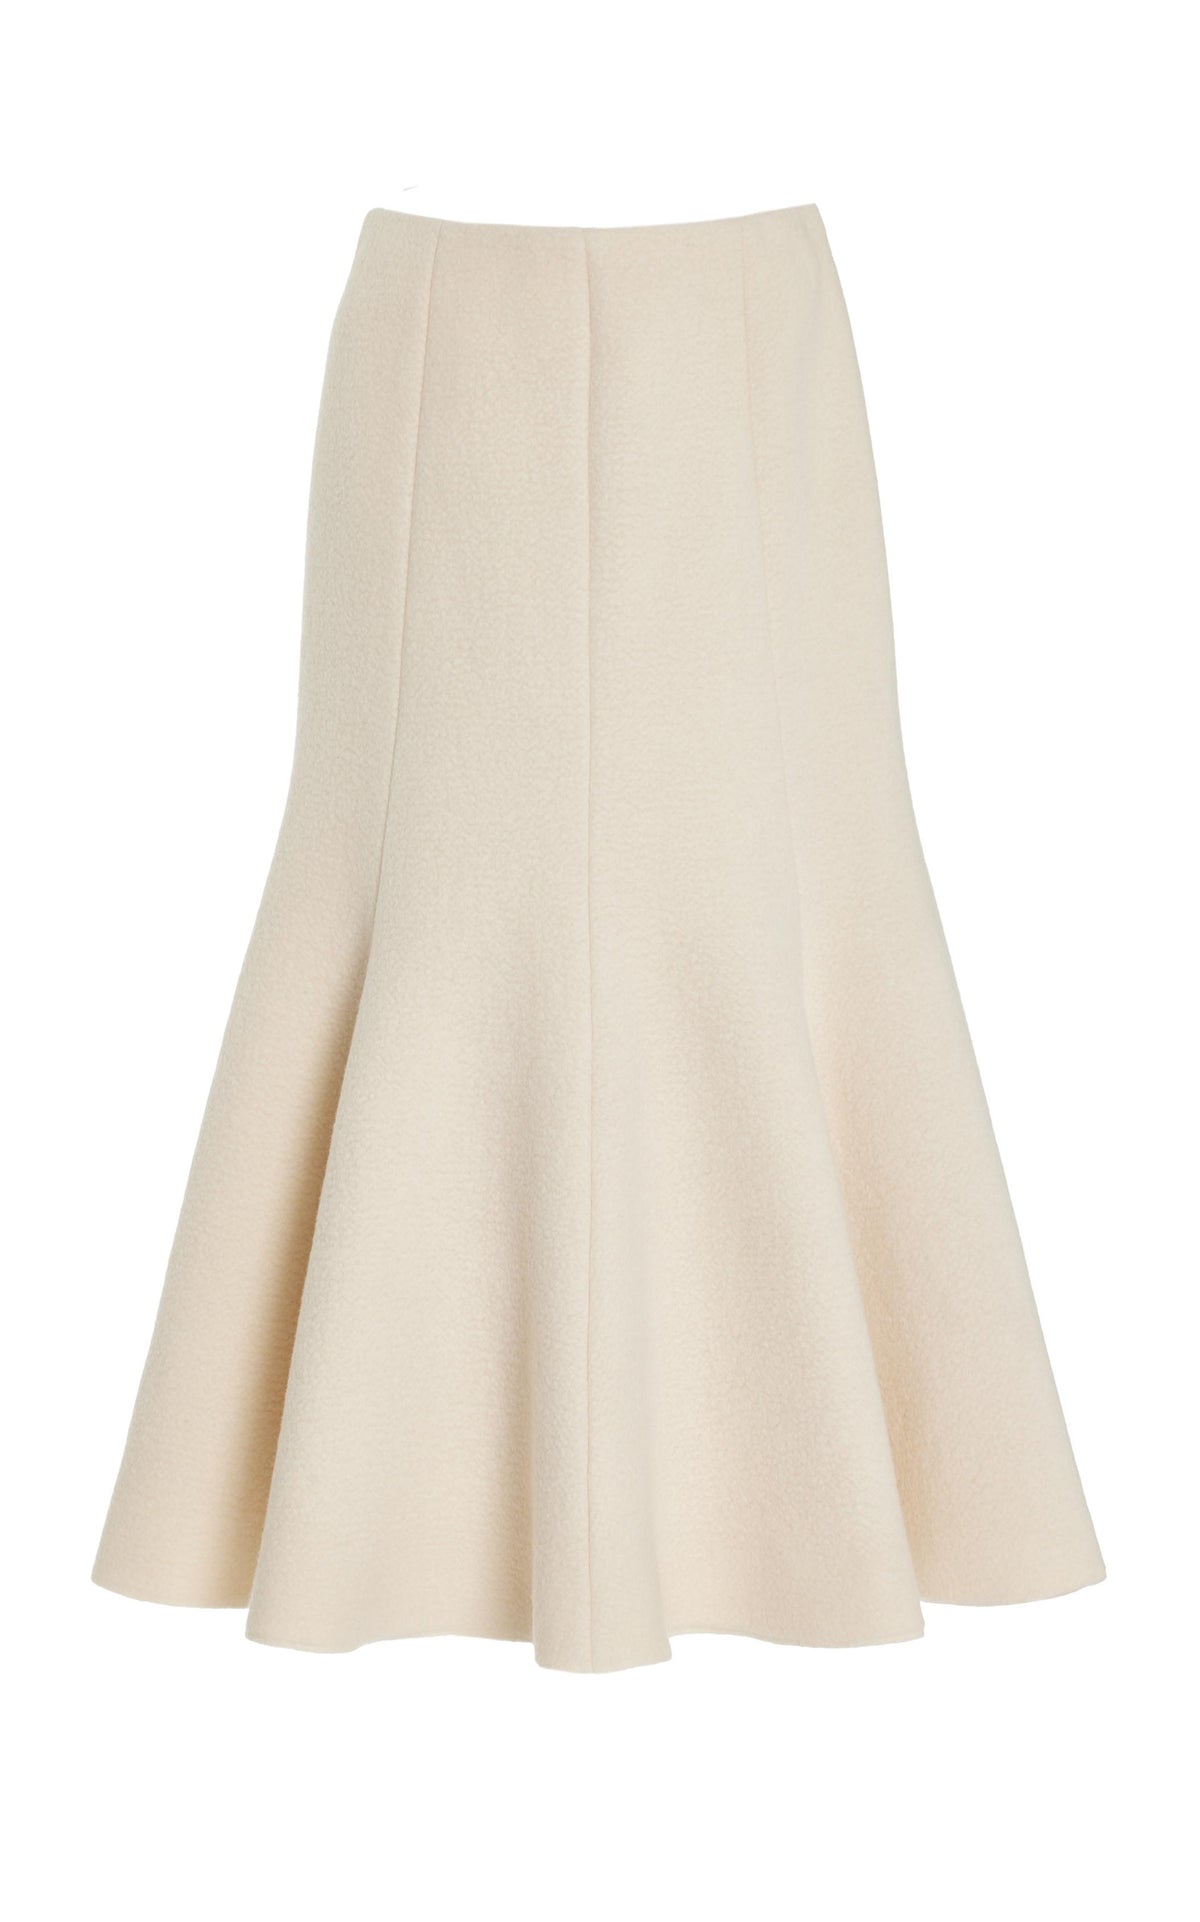 Amy Skirt in Ivory Recycled Cashmere Felt